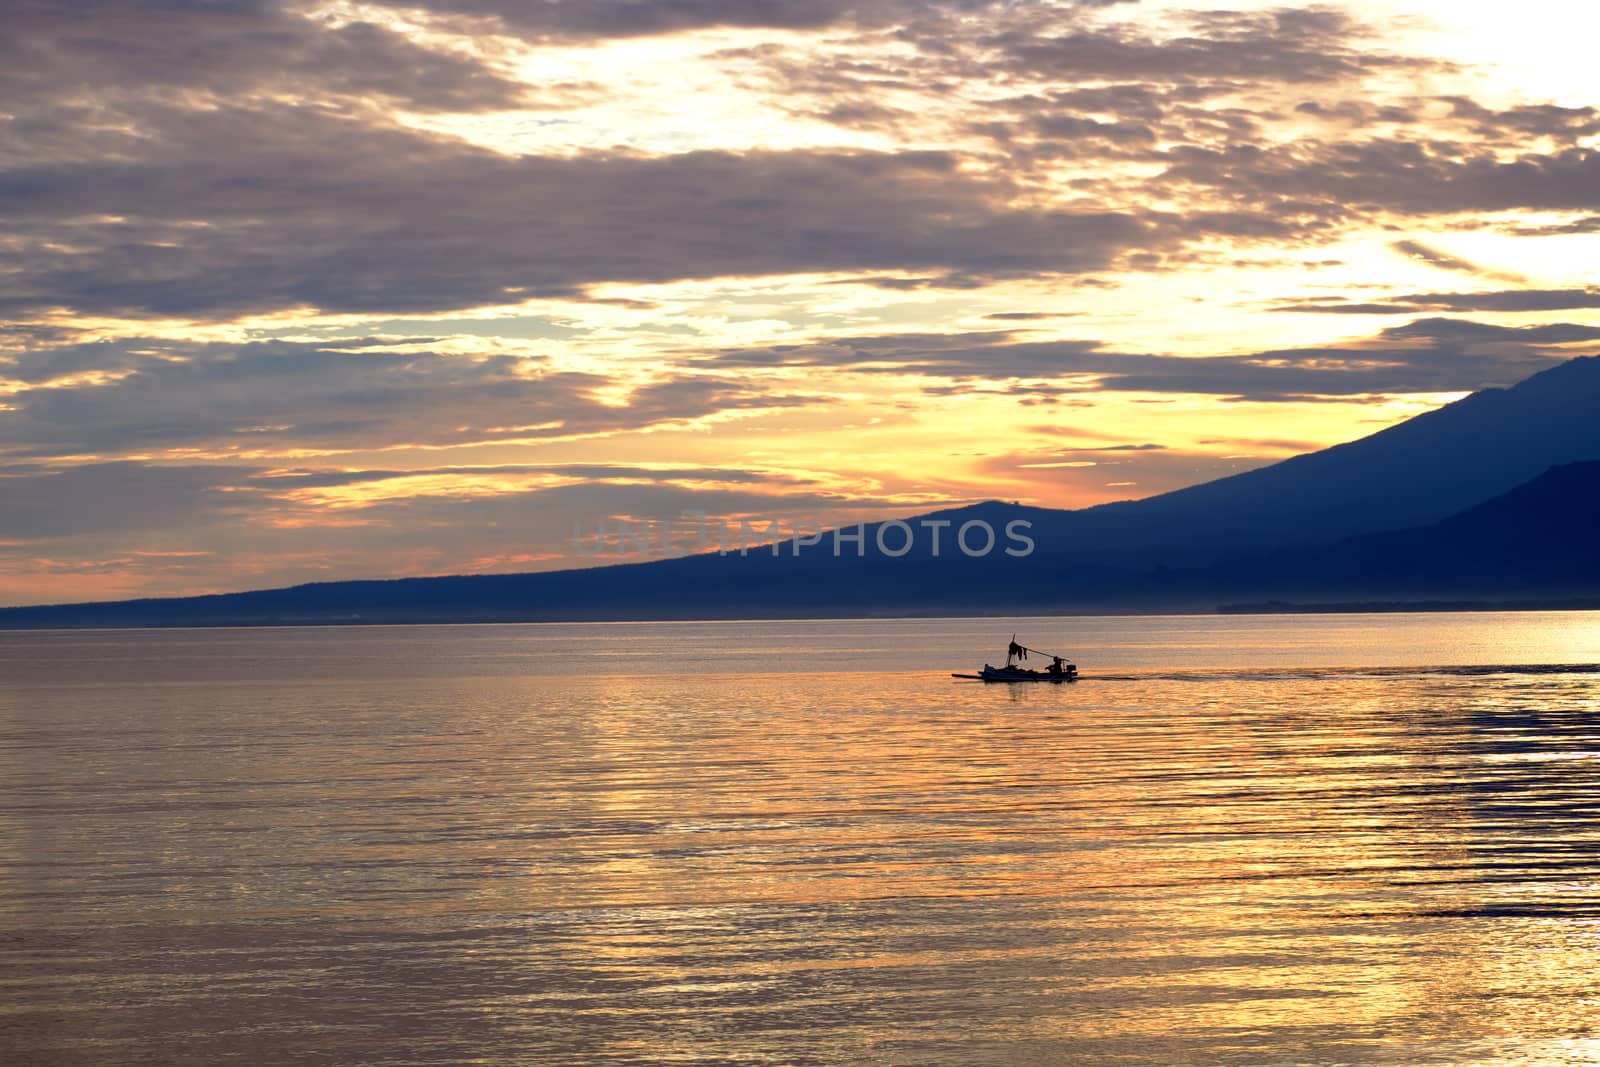 Fisherman boat with lombok volcano Rinjani in the background before the sunrise by rainfallsup